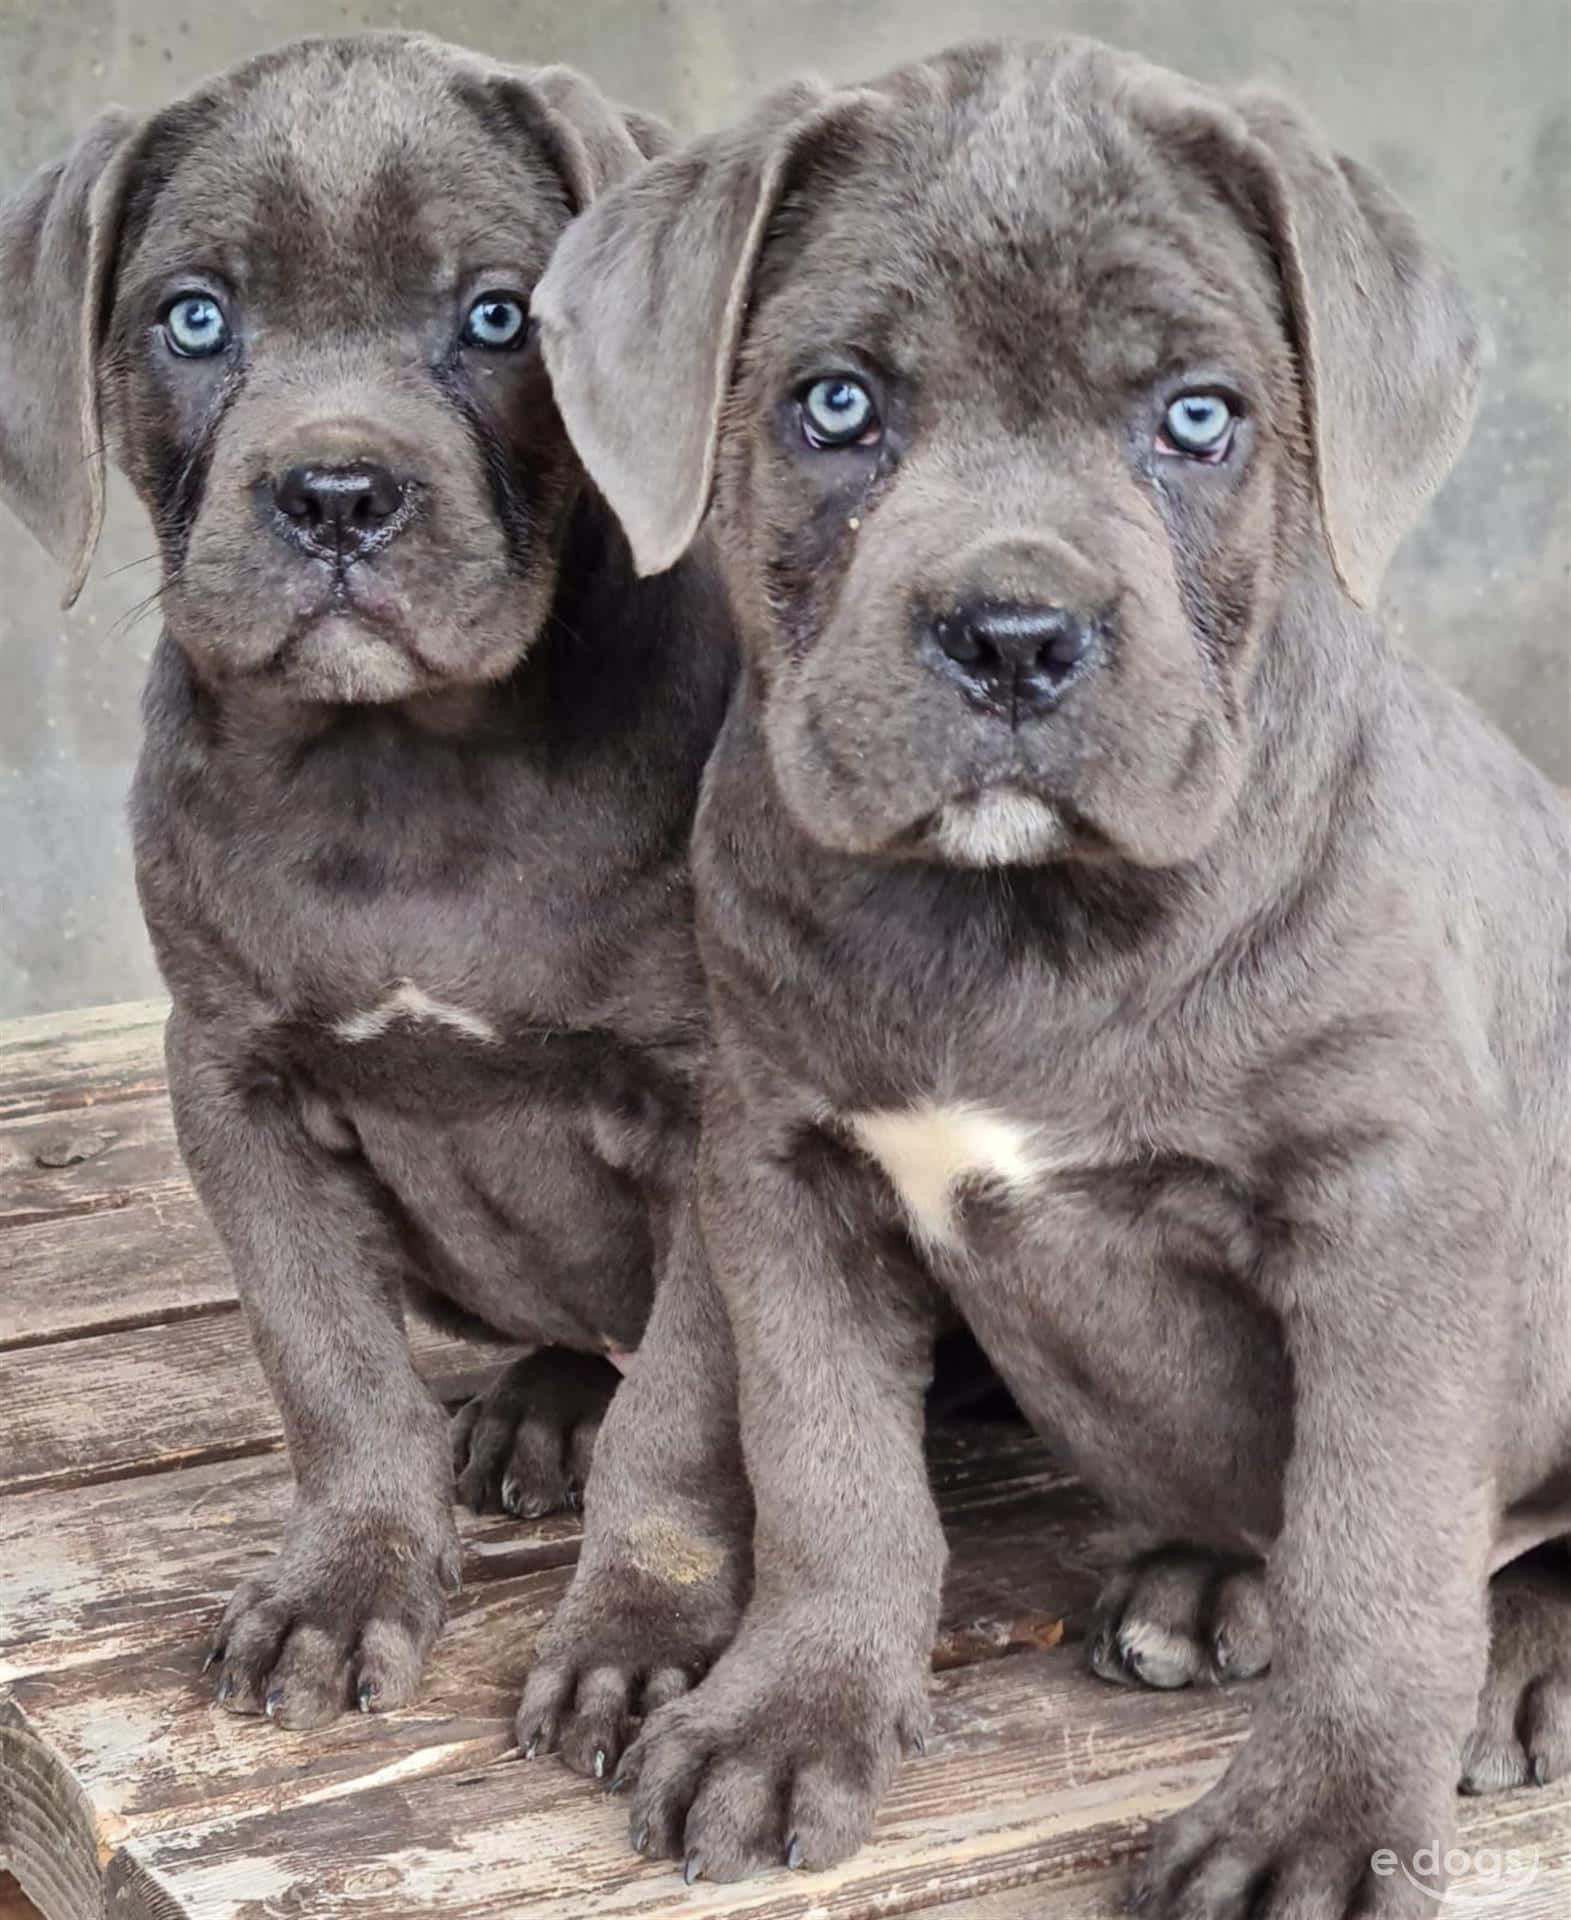 "The Cane Corso, a majestic and powerful breed of dog"